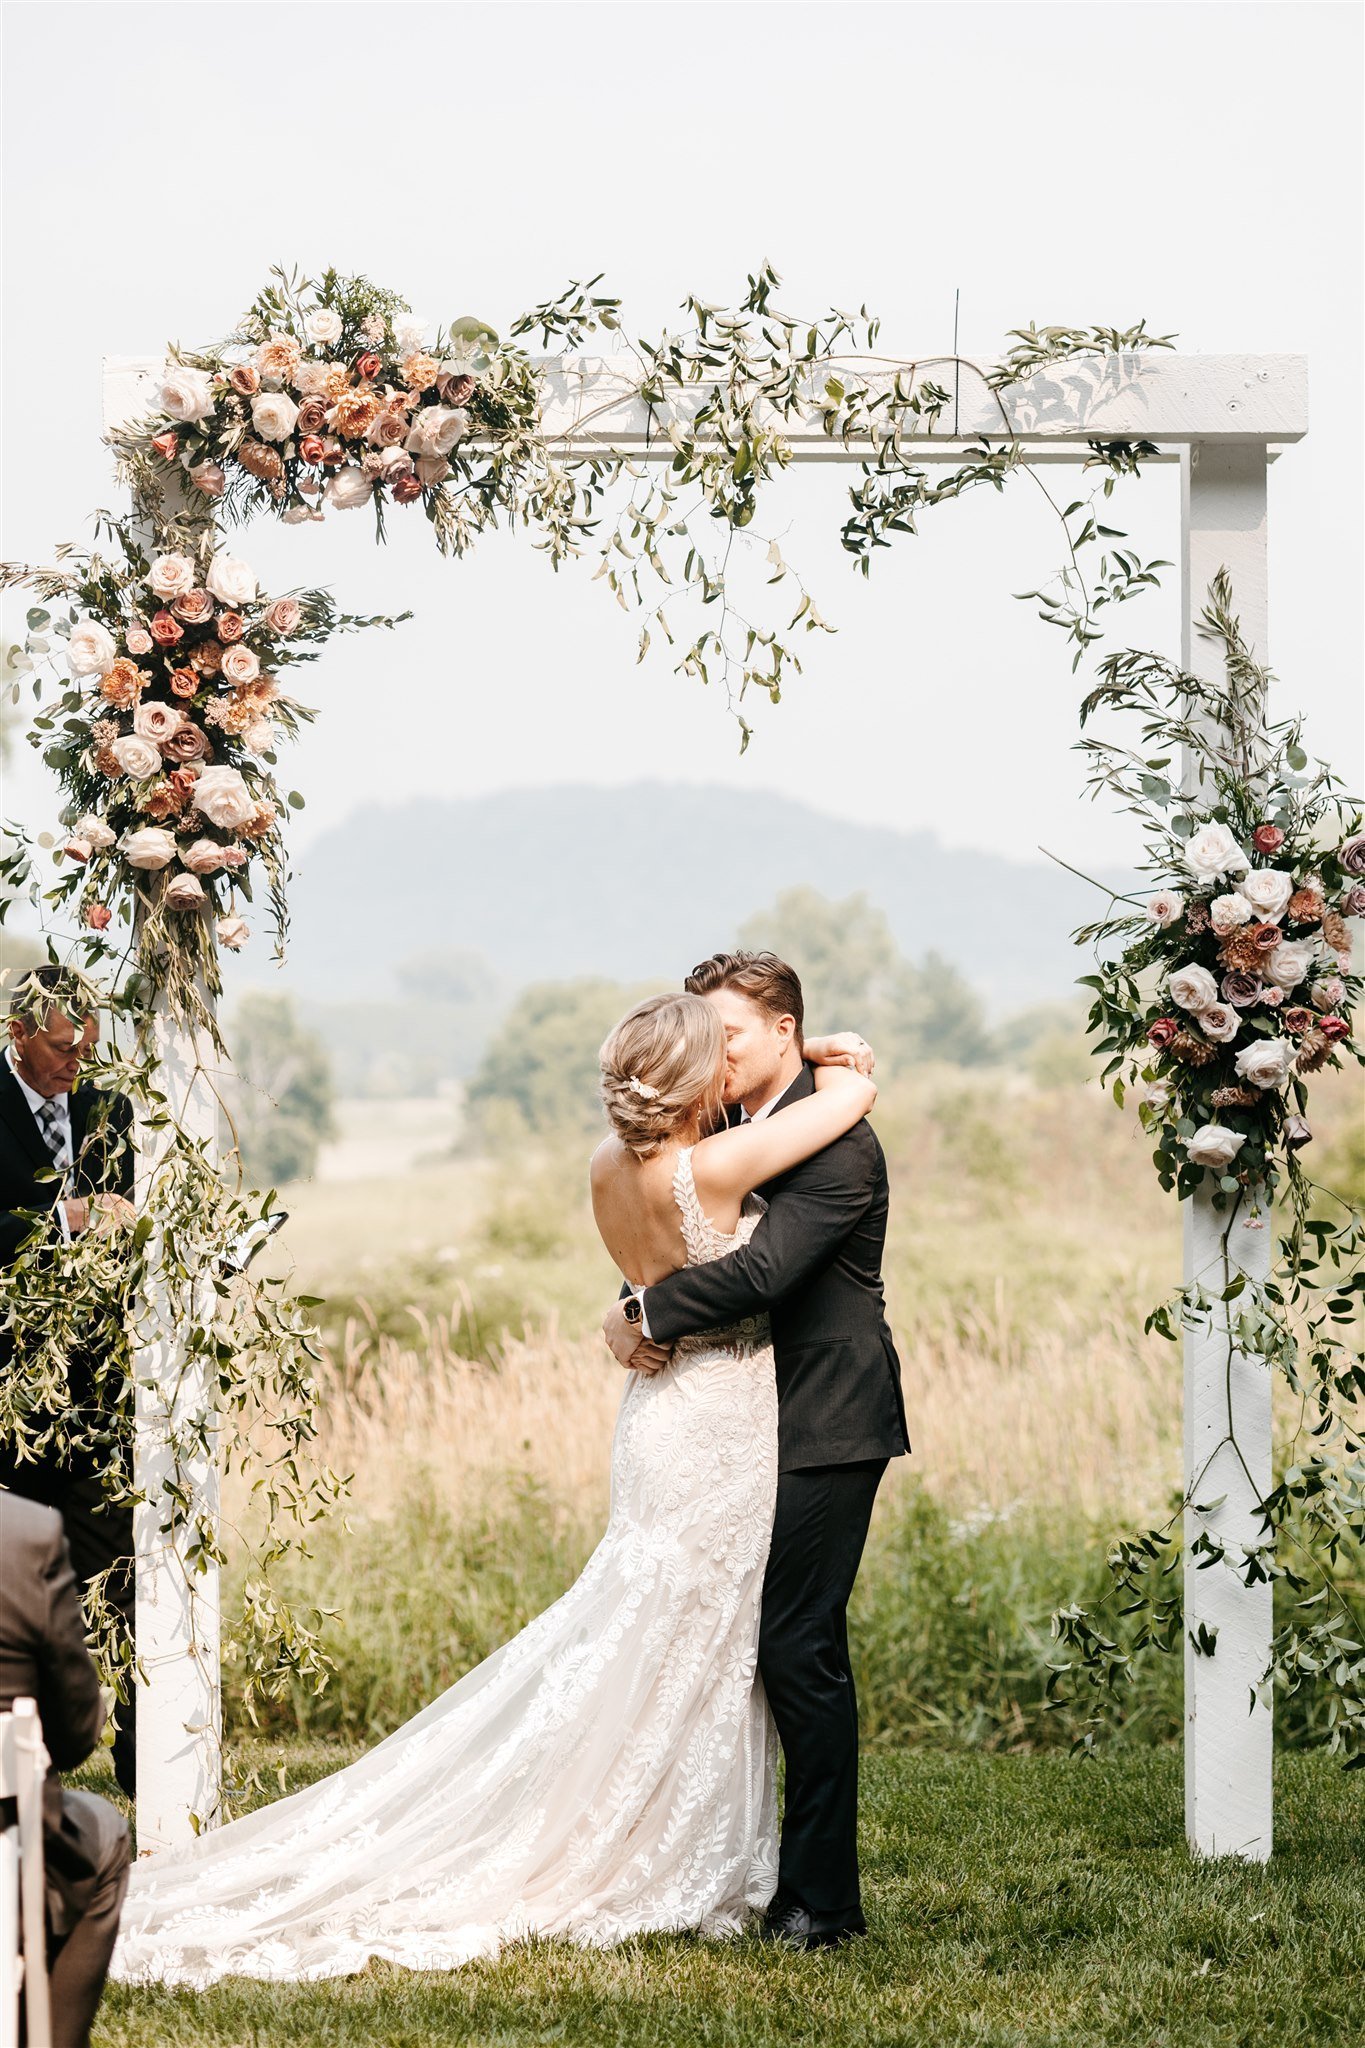  “HappiLily Events helped to bring our wedding visions + ideas into a beautiful reality!! We cannot express how much Lily helped us in having the perfect day!   Her expertise, kindness, and organization really makes her the kind of wedding planner yo